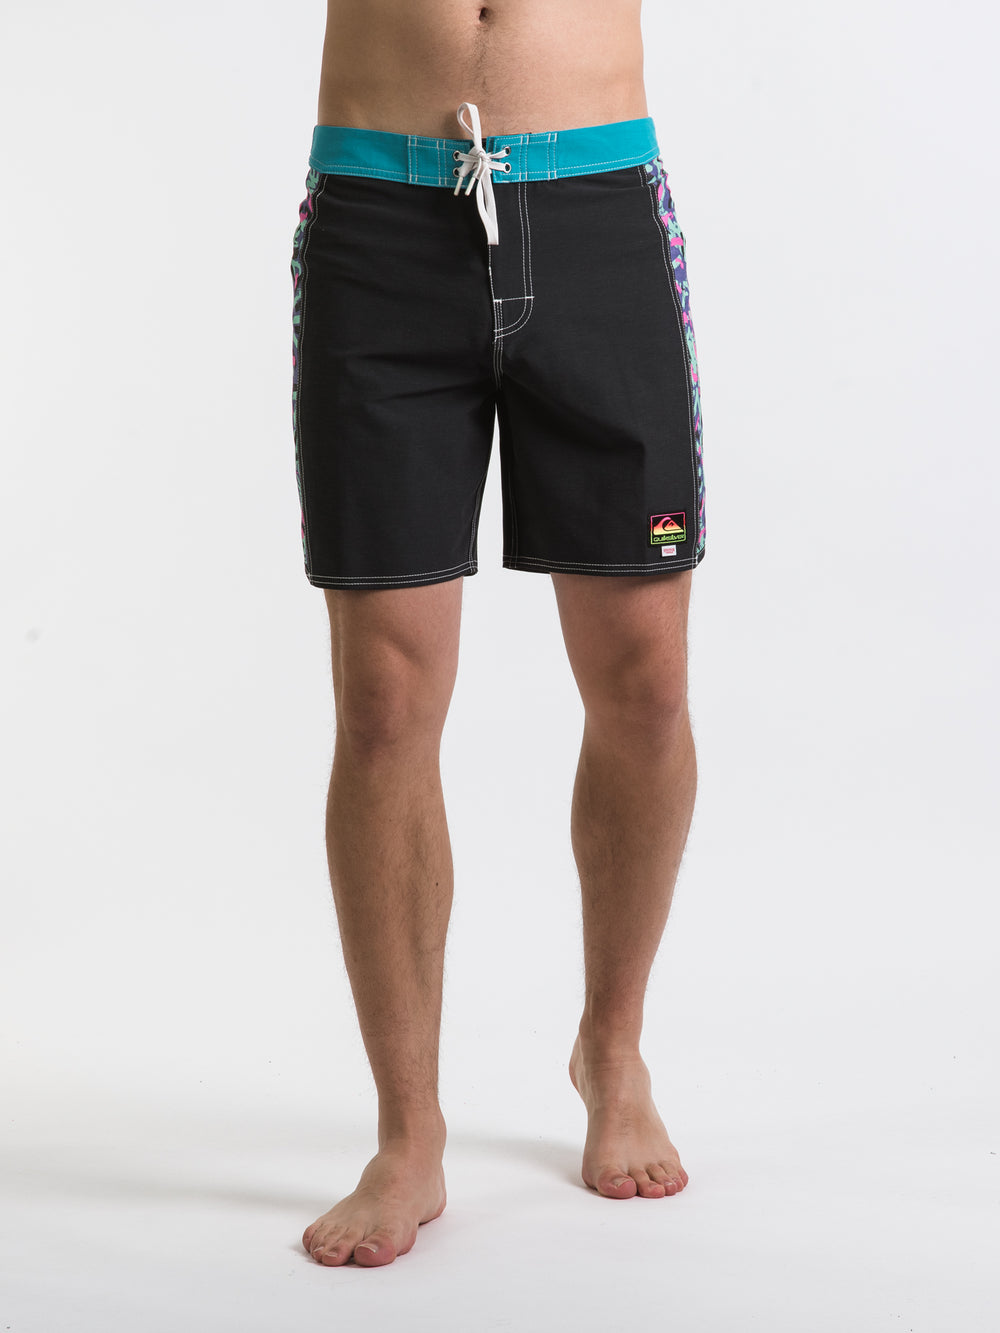 QUIKSILVER STRANGER THINGS ORIGINAL ARCH 1986 18" SHORT - CLEARANCE